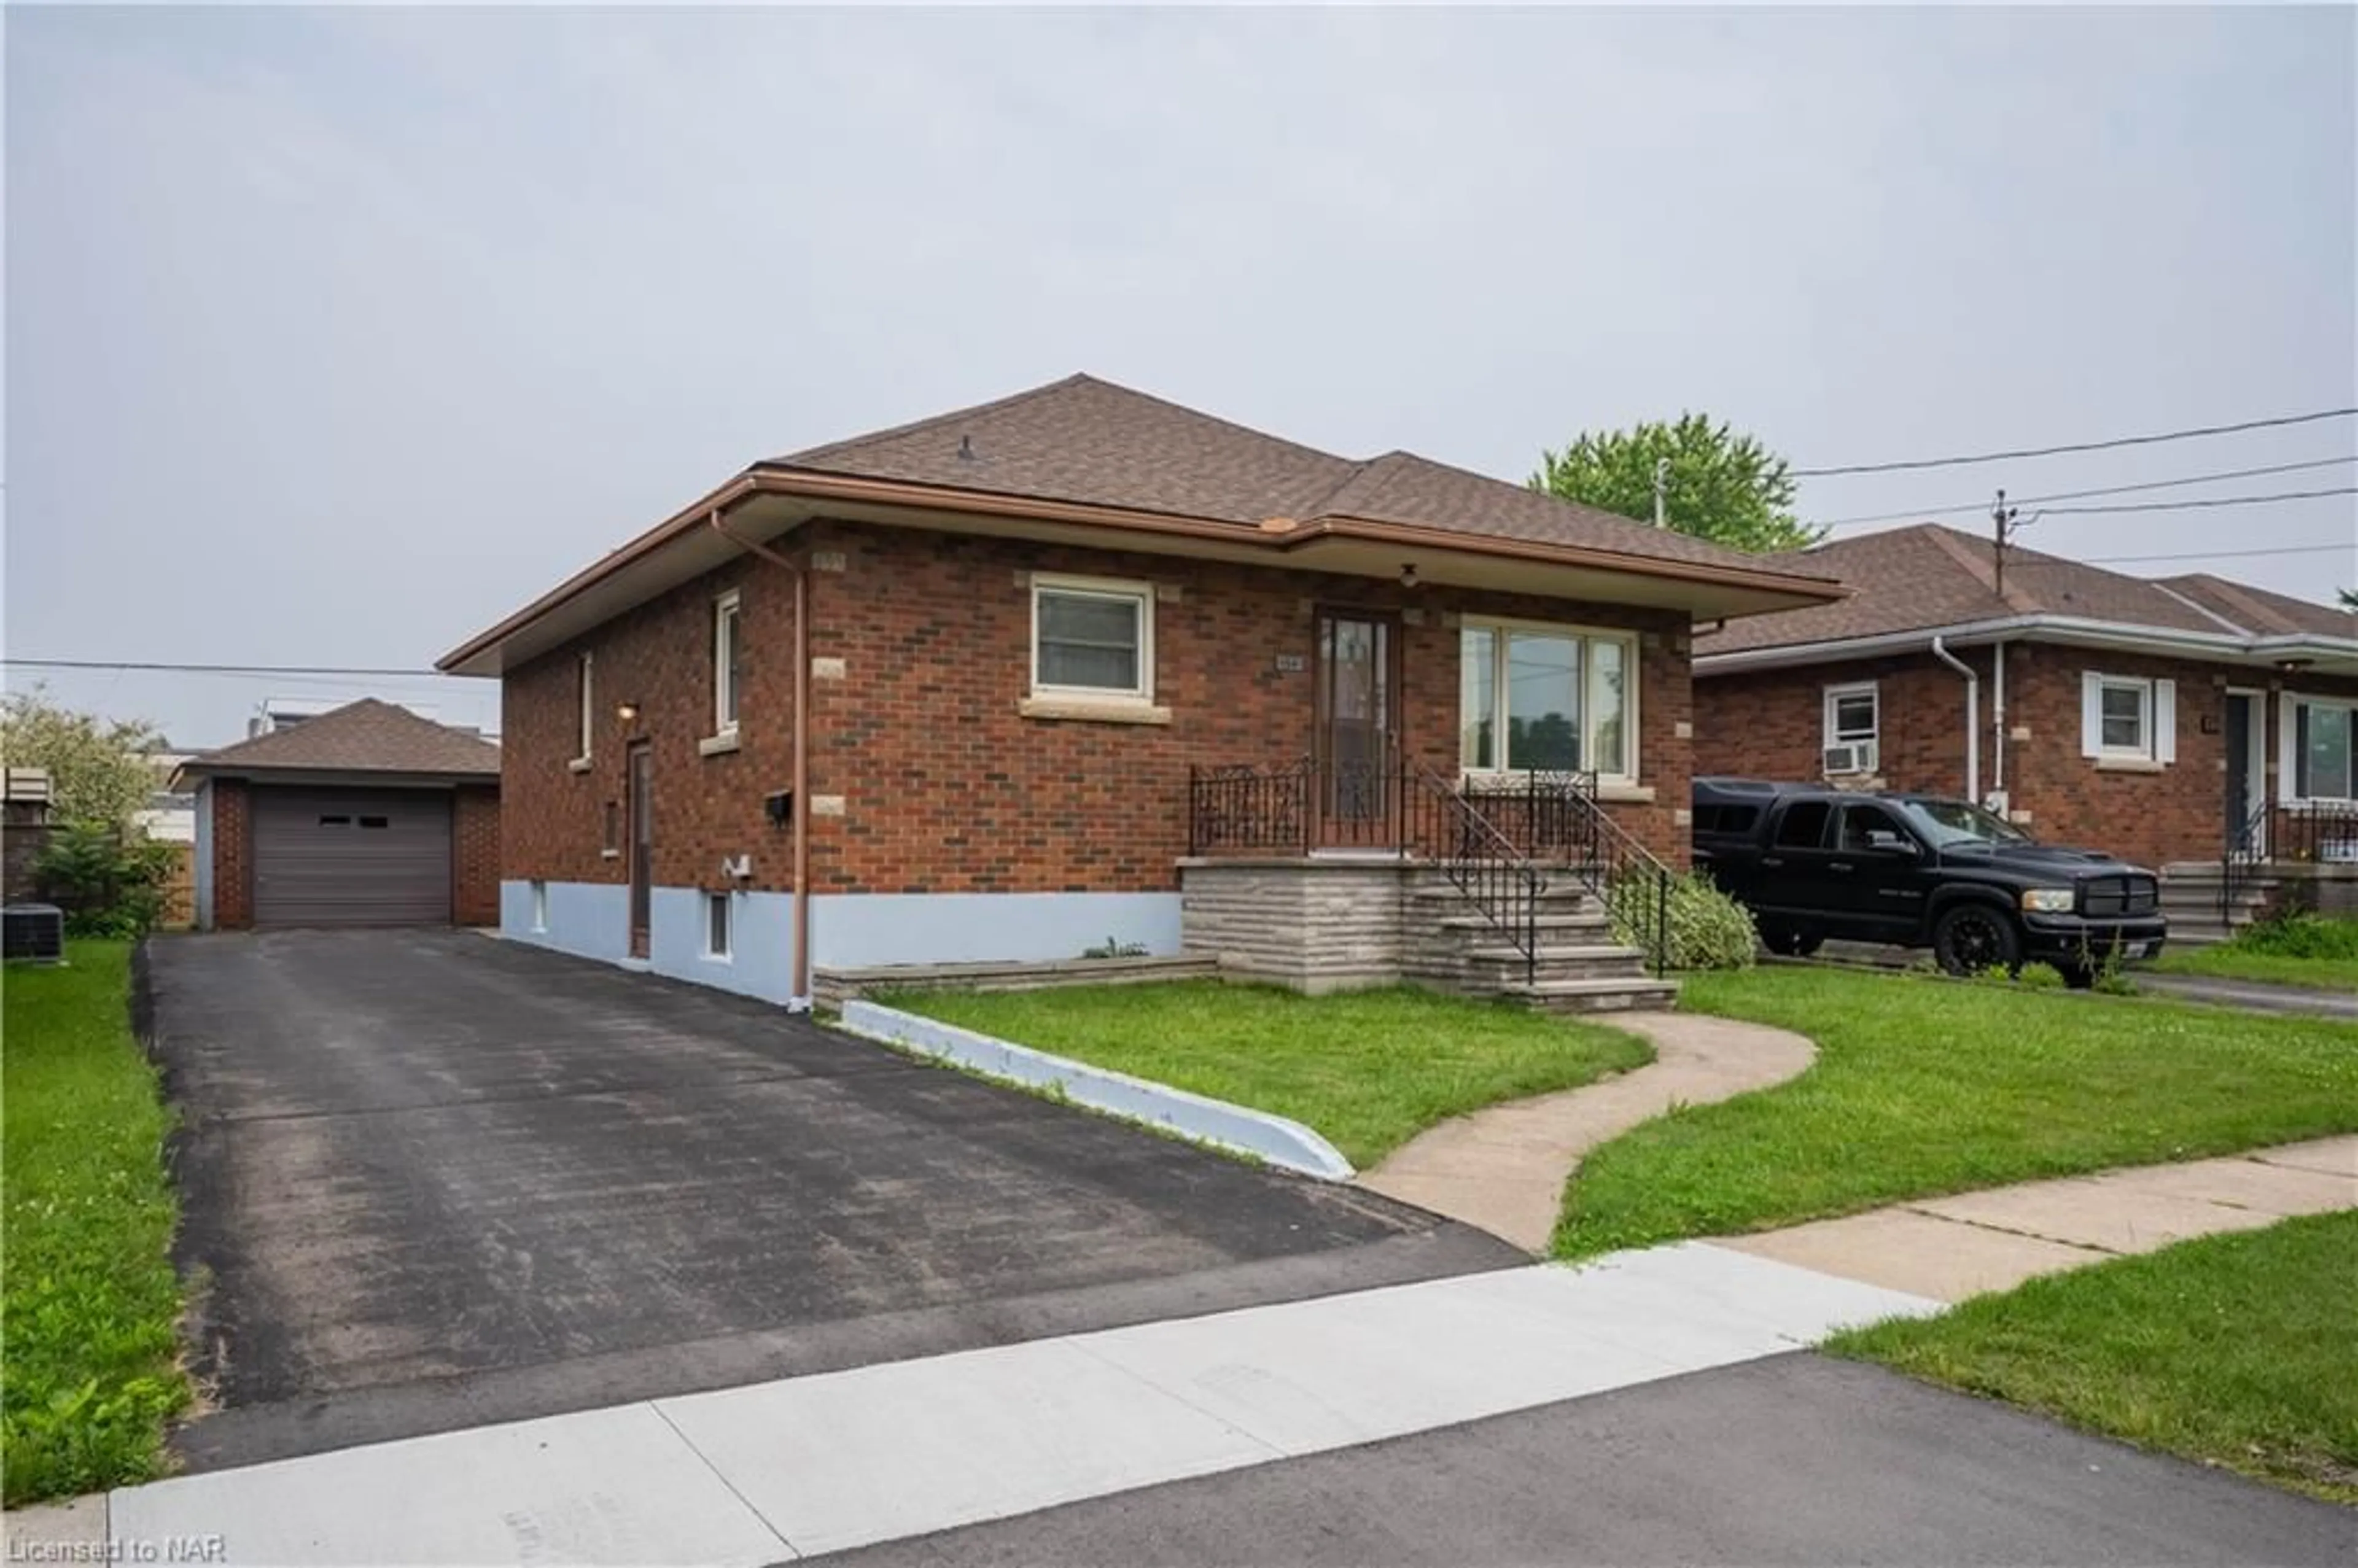 Home with brick exterior material for 150 Clarke St, Port Colborne Ontario L3K 2G3